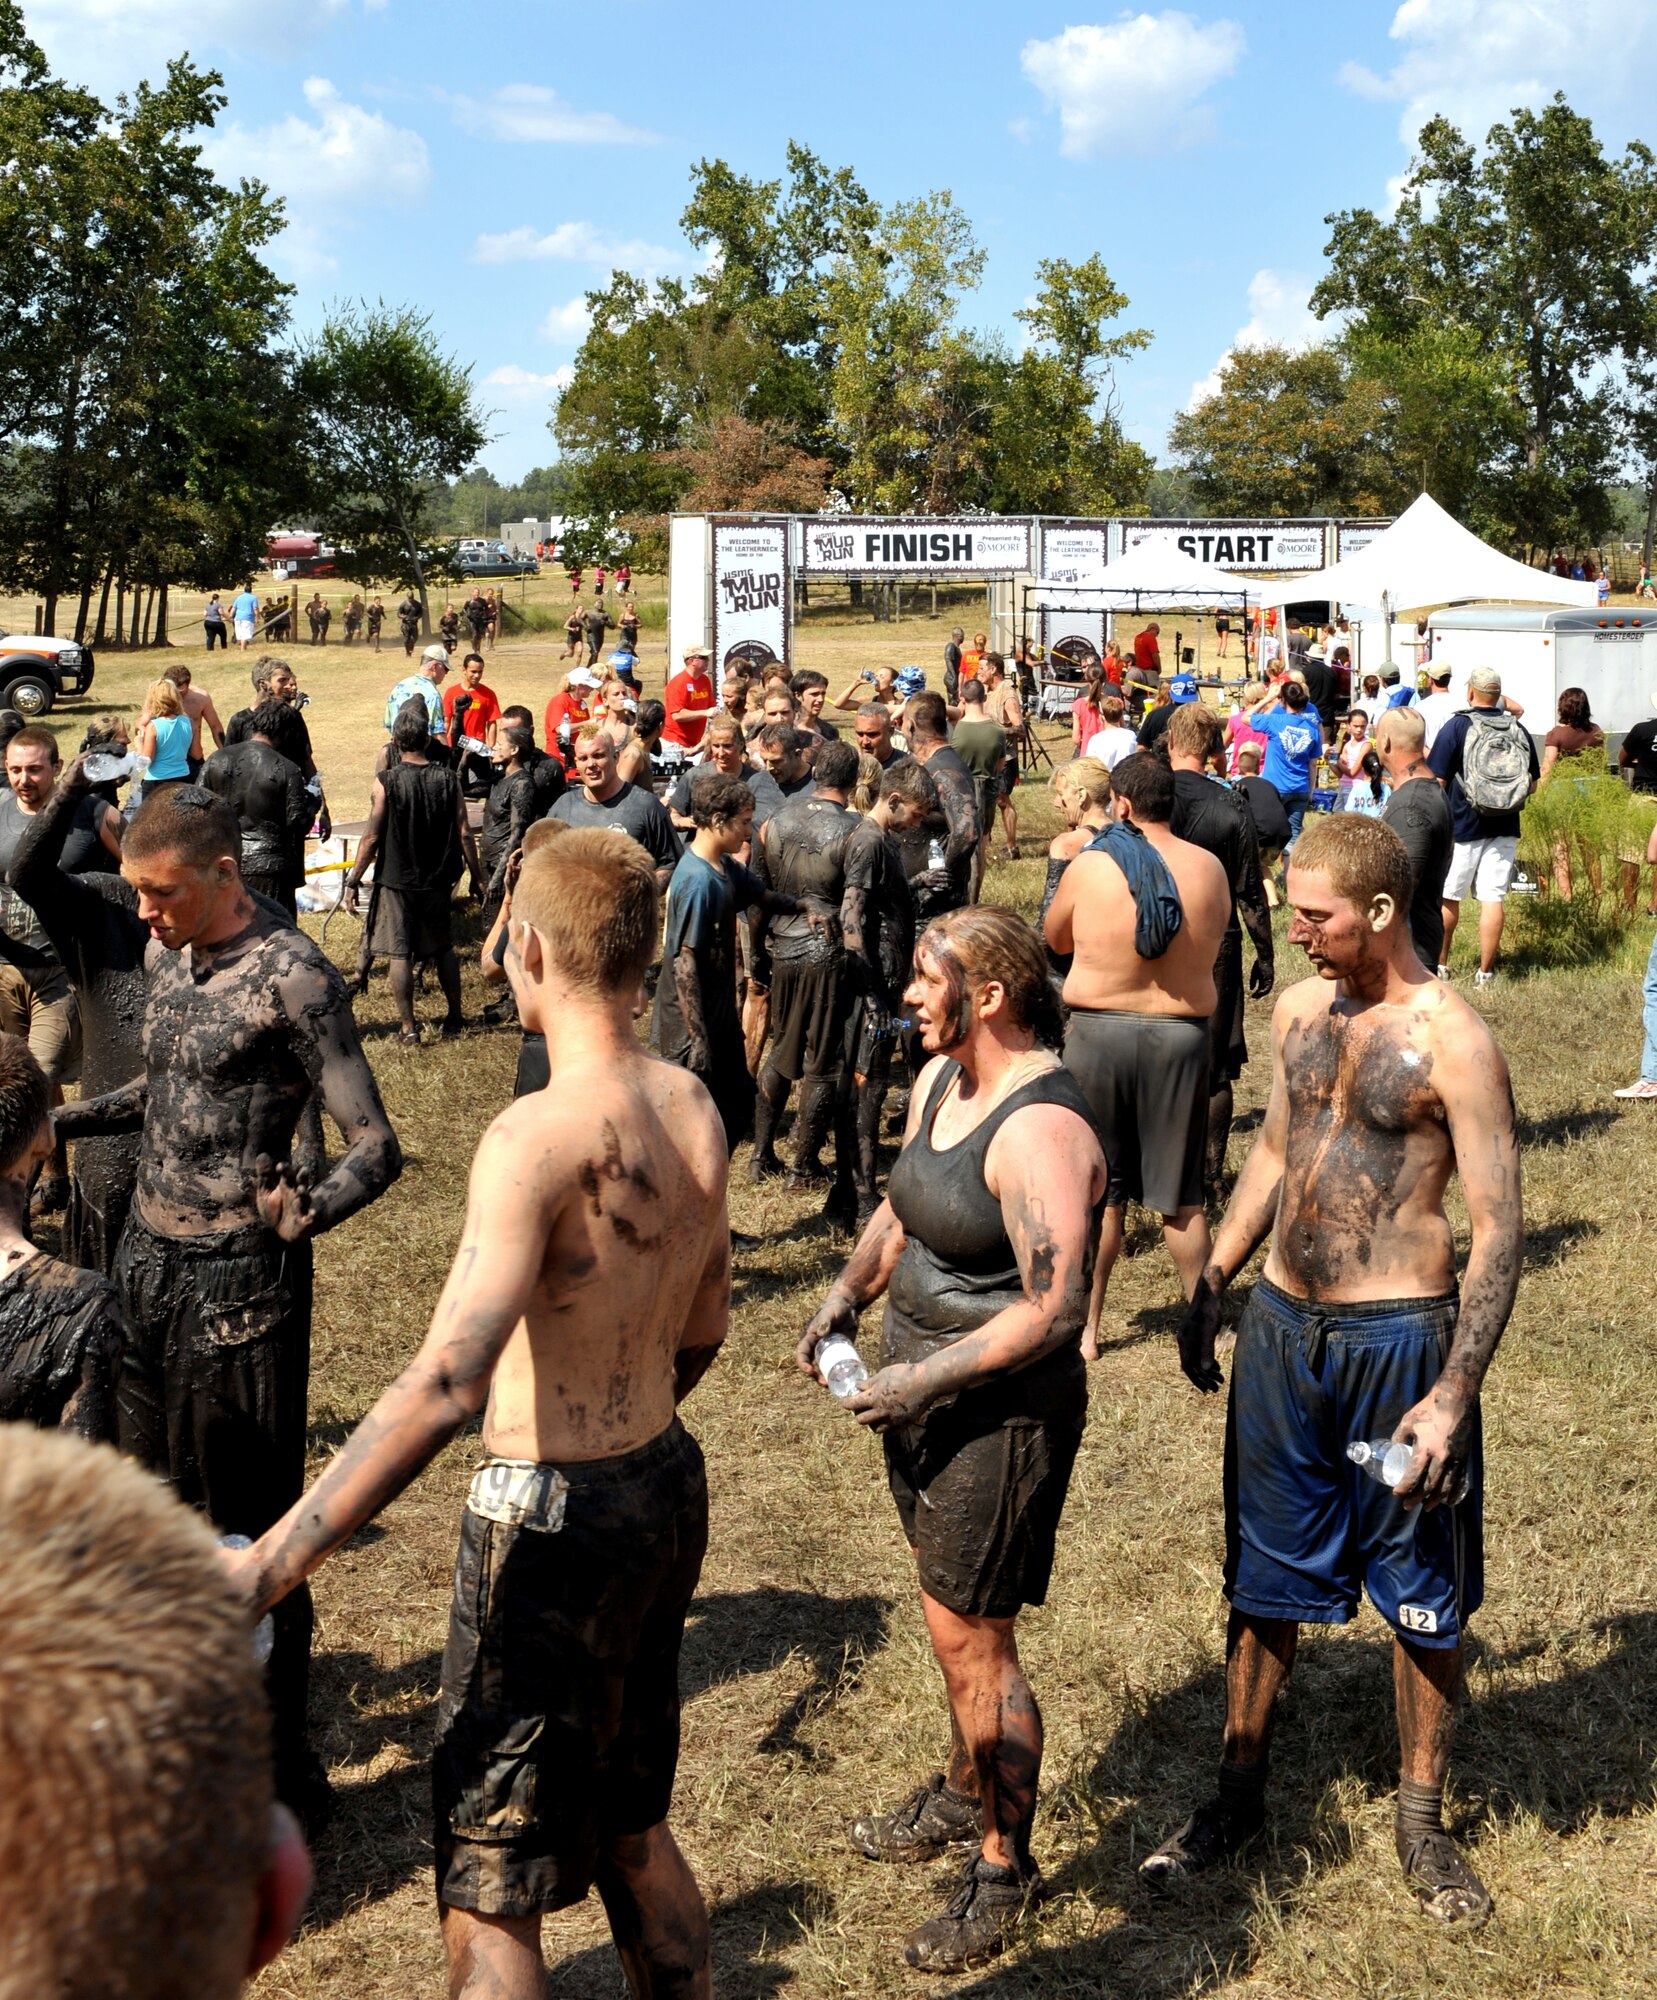 100925-F-4406D-047 SHAW AIR FORCE BASE, S.C.- A group of contestants rest after finishing the 4.2 mile obstacle course at the 17th Annual United States Marine Corps Mud Run in Gaston, S.C., Sept. 25, 2010. The USMC Mud Run is held annually to raise money for Marines and their families who have been killed on duty. Its profits also go towards scholarships and local events which promote the Marine Corps in the community. (U.S. Air Force photo/Airman 1st Class Tabatha L. Duarte (Released)